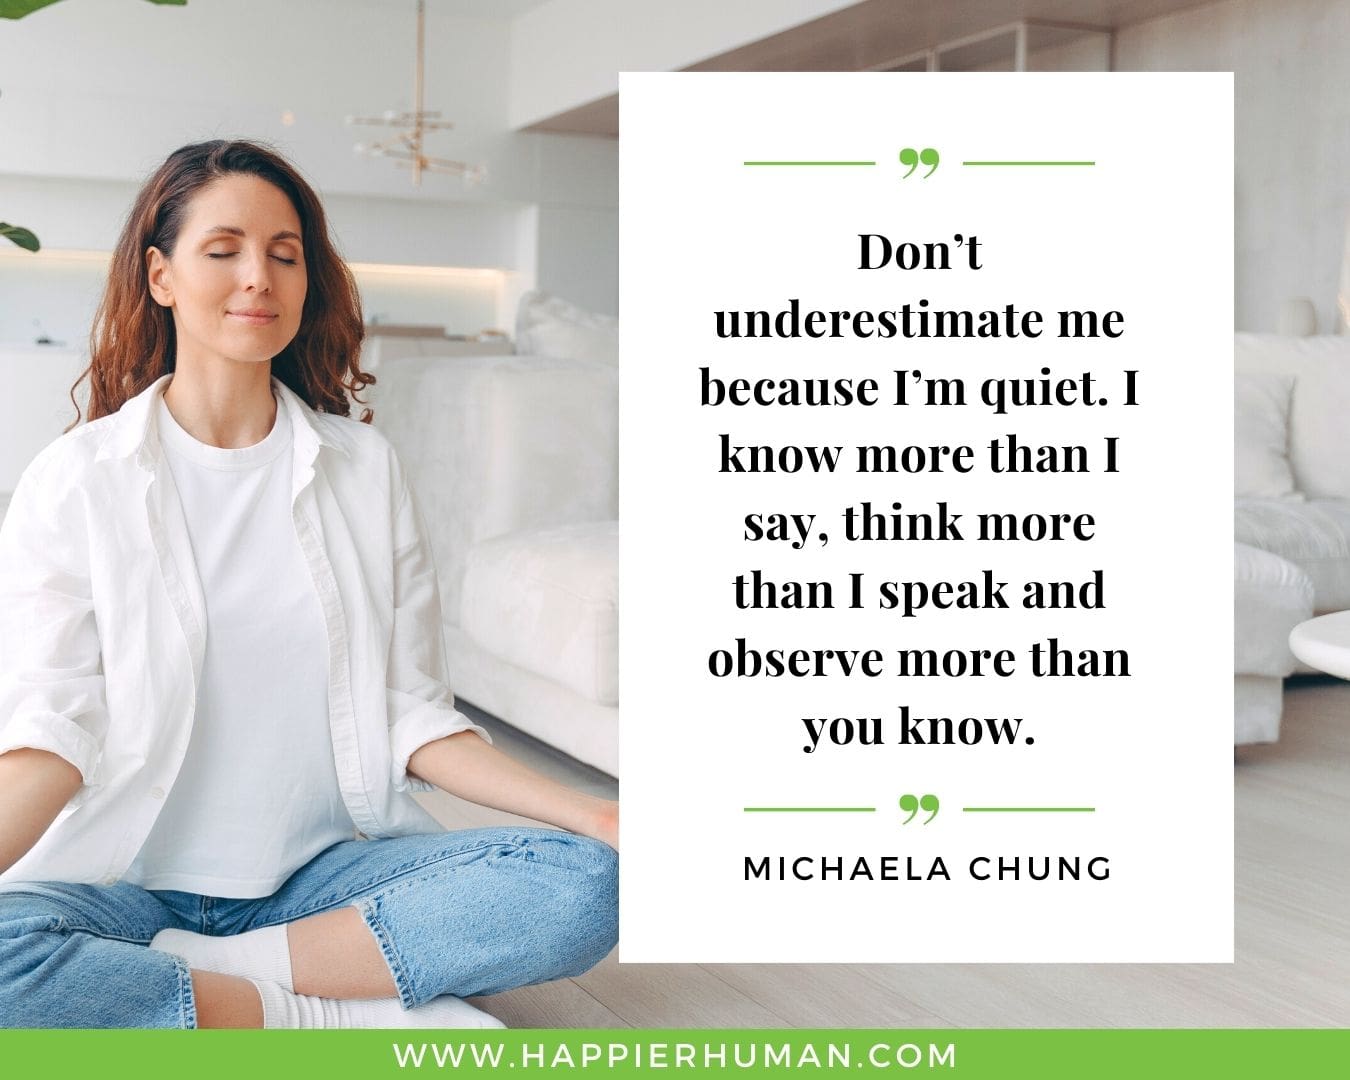 Introvert Quotes - “Don’t underestimate me because I’m quiet. I know more than I say, think more than I speak and observe more than you know.” – Michaela Chung